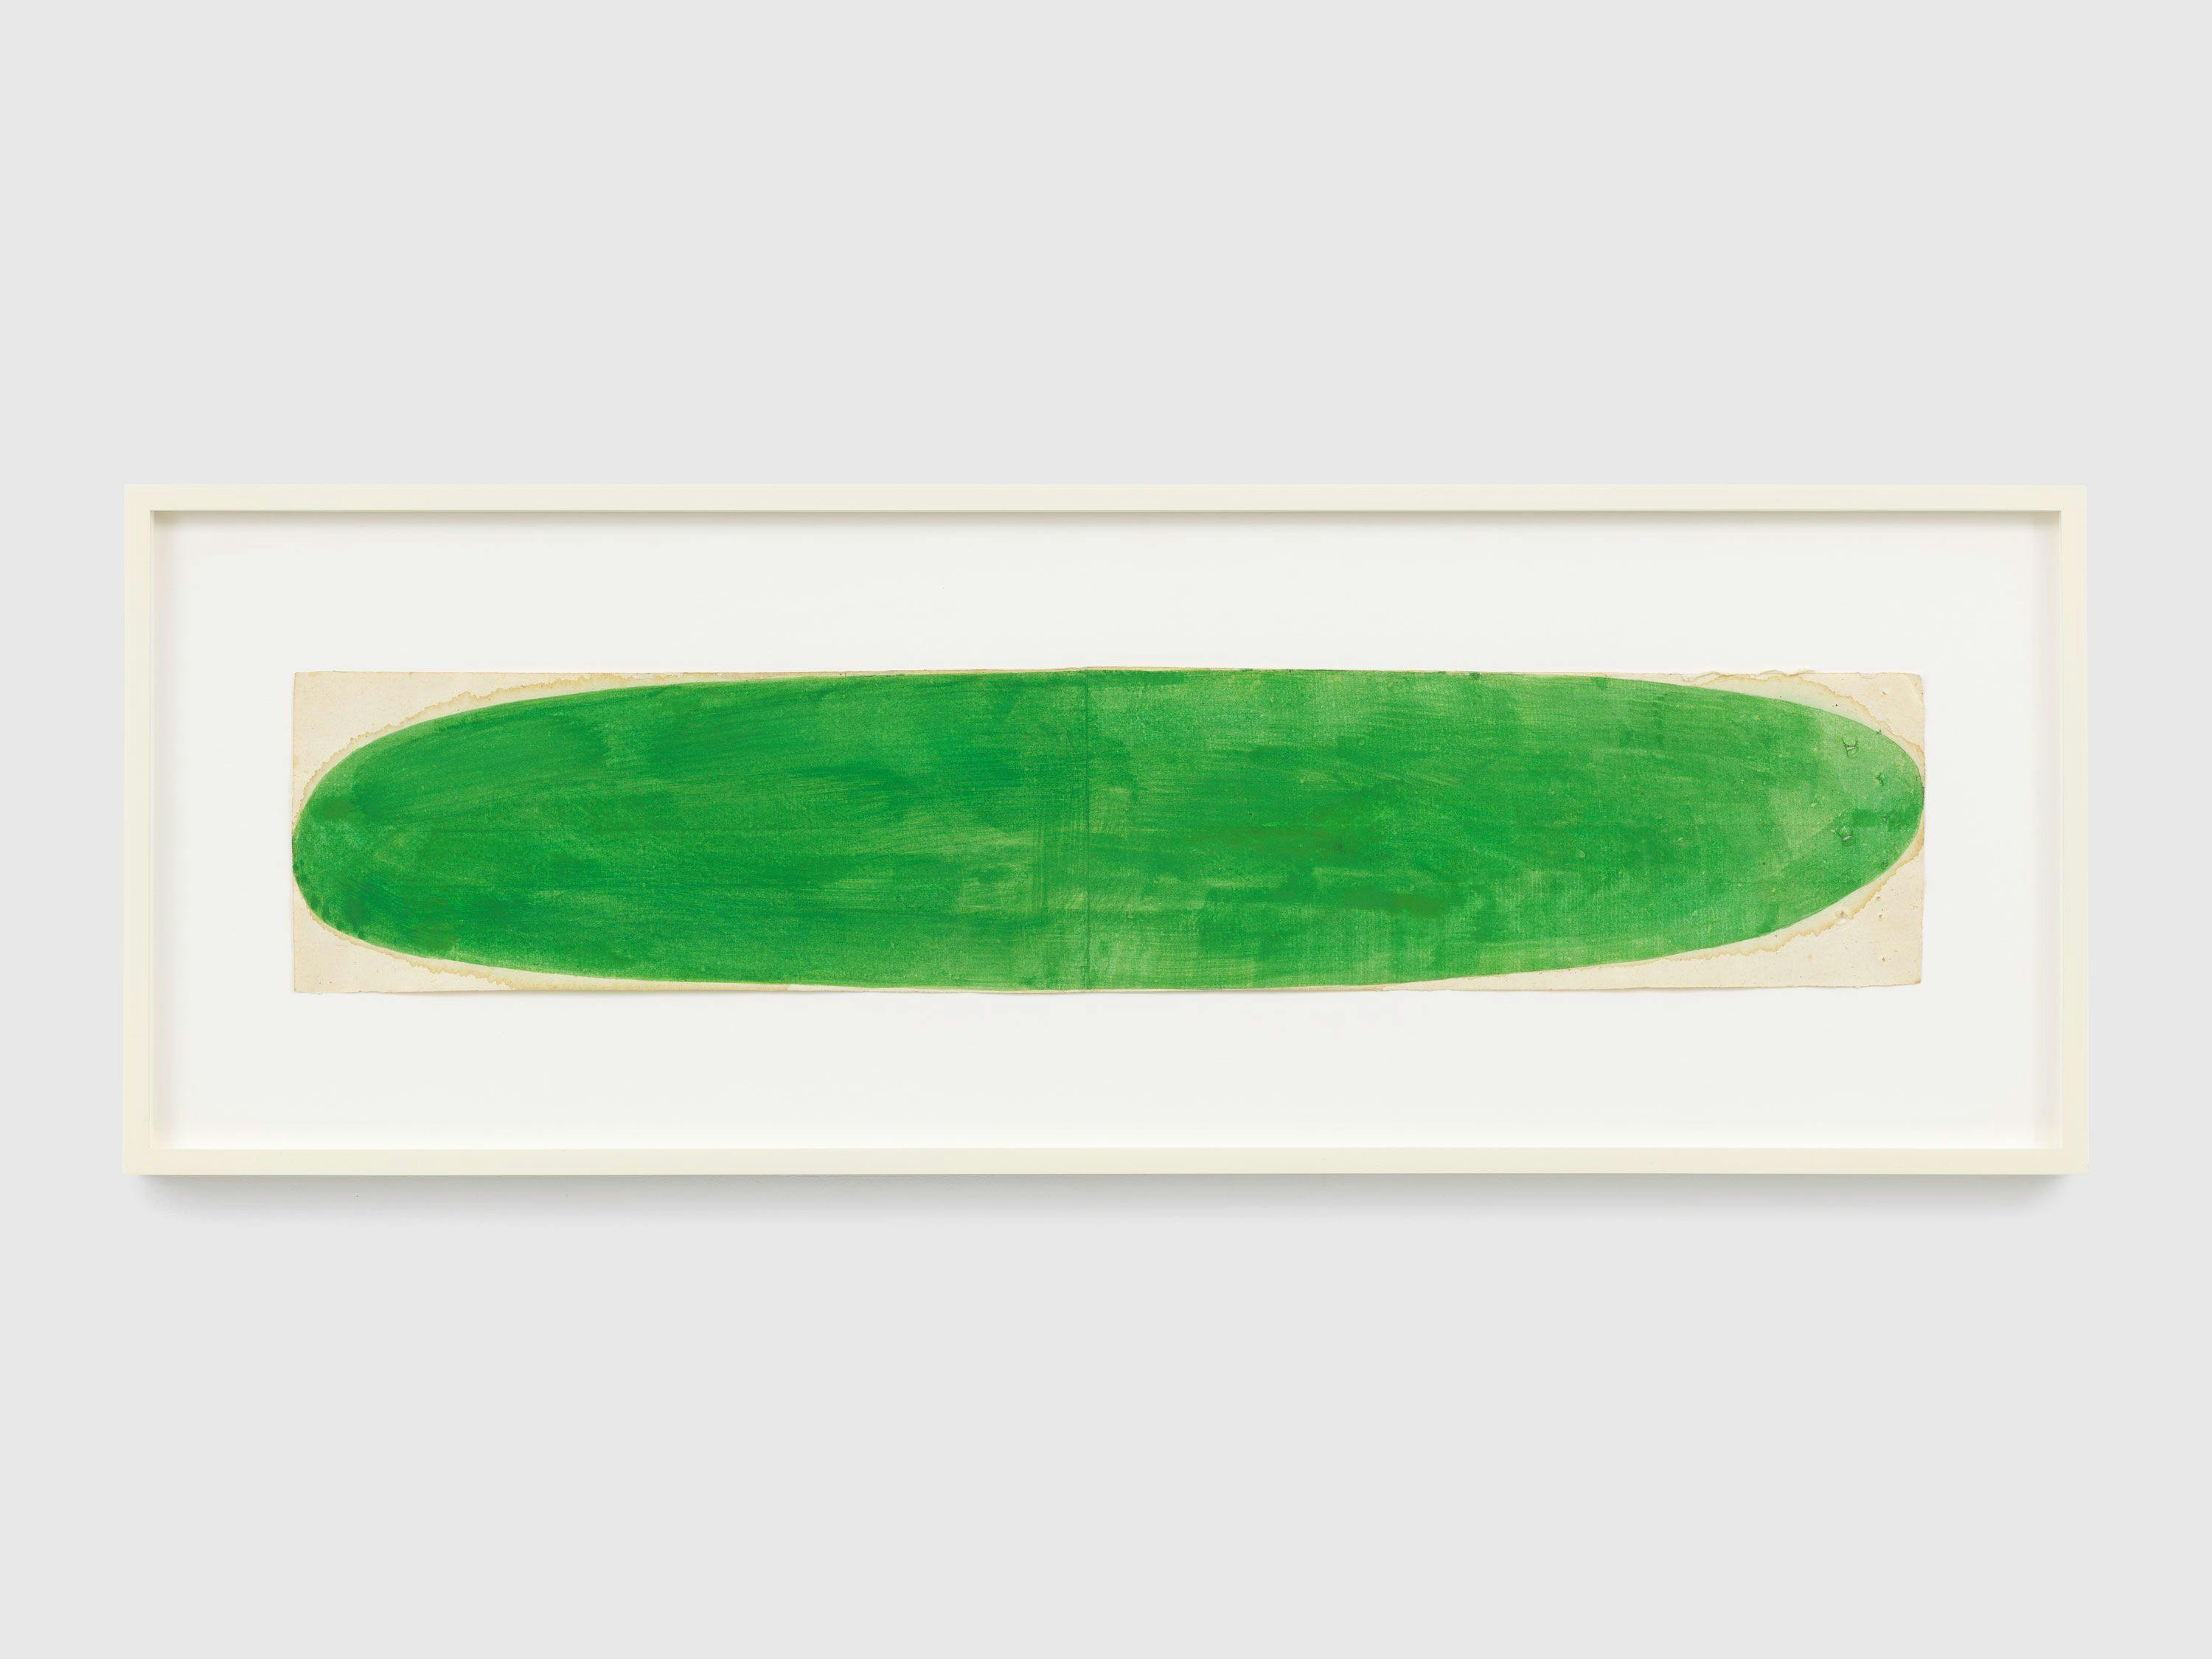 A watercolor on paper by Suzan Frecon, titled vivid green composition on a long format, dated 2016,